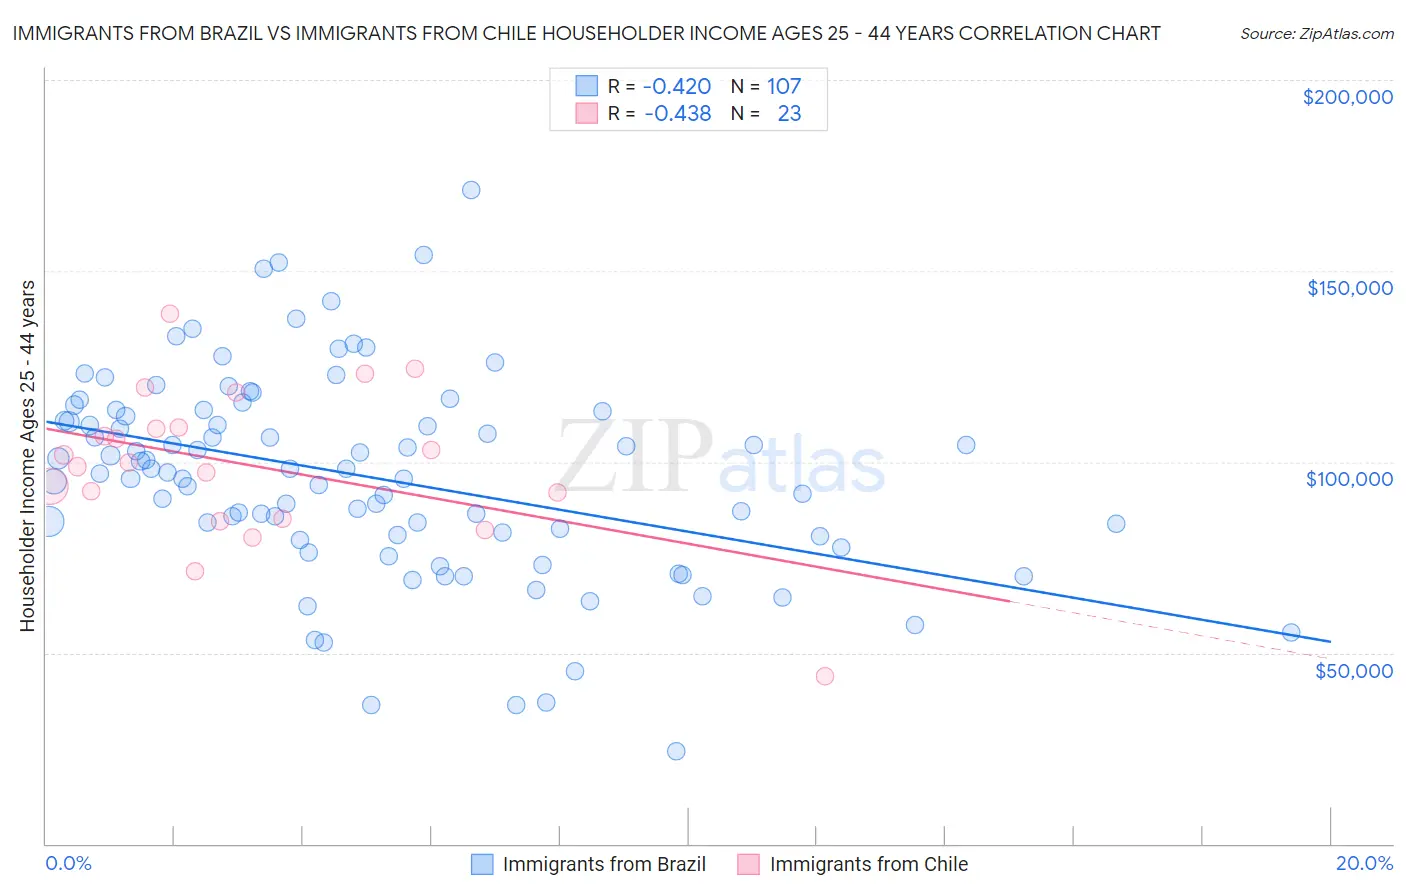 Immigrants from Brazil vs Immigrants from Chile Householder Income Ages 25 - 44 years